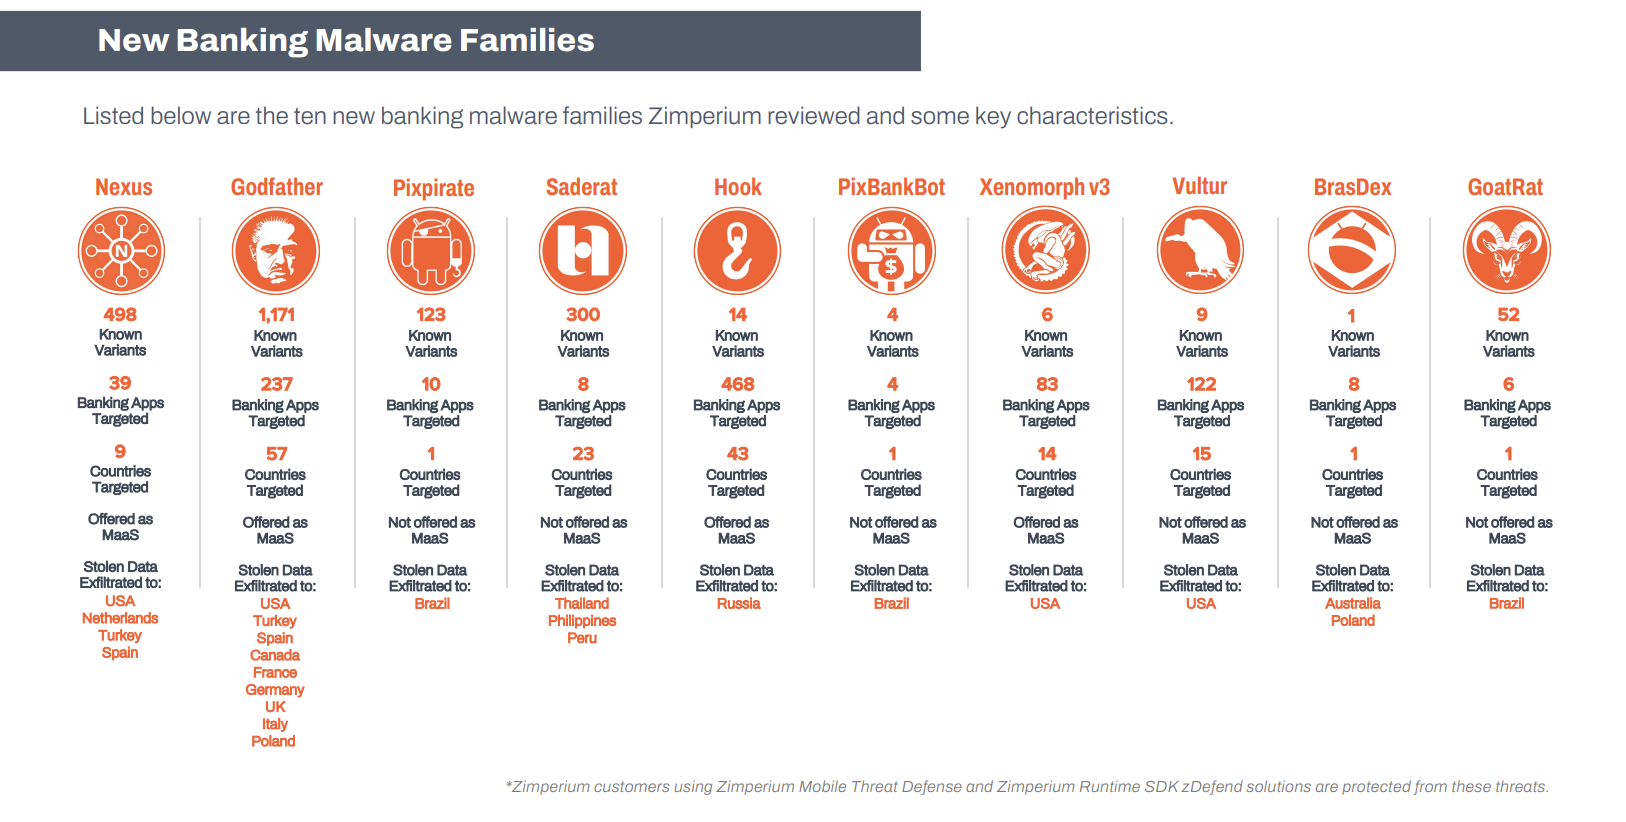 New banking malware families in 2023, Source: 2023 Mobile Banking Heists Report, Zimperium, Dec 2023